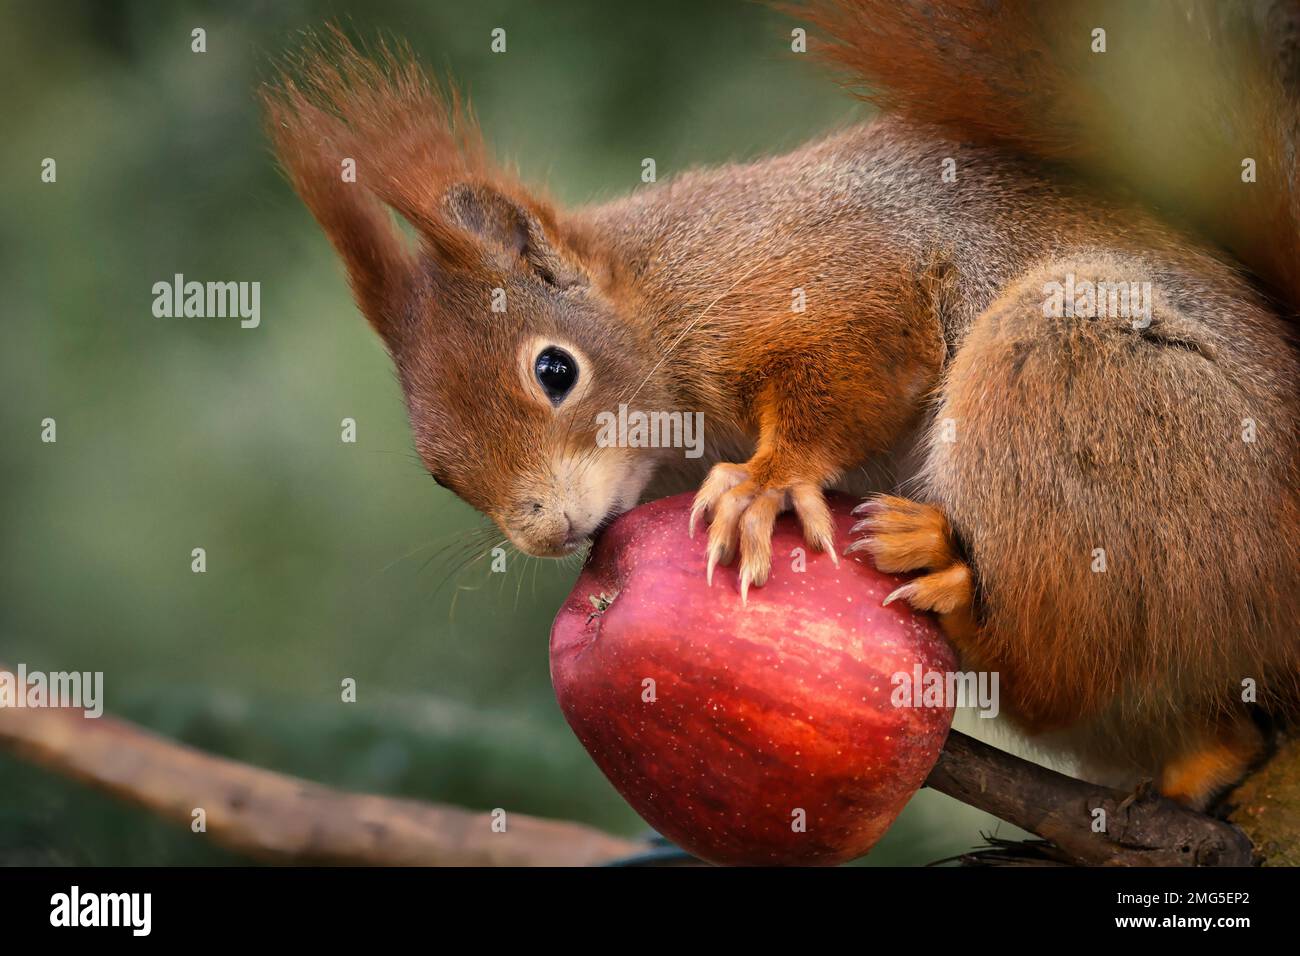 Squirrel on a branch nibbles a red apple and looks at the camera Stock Photo